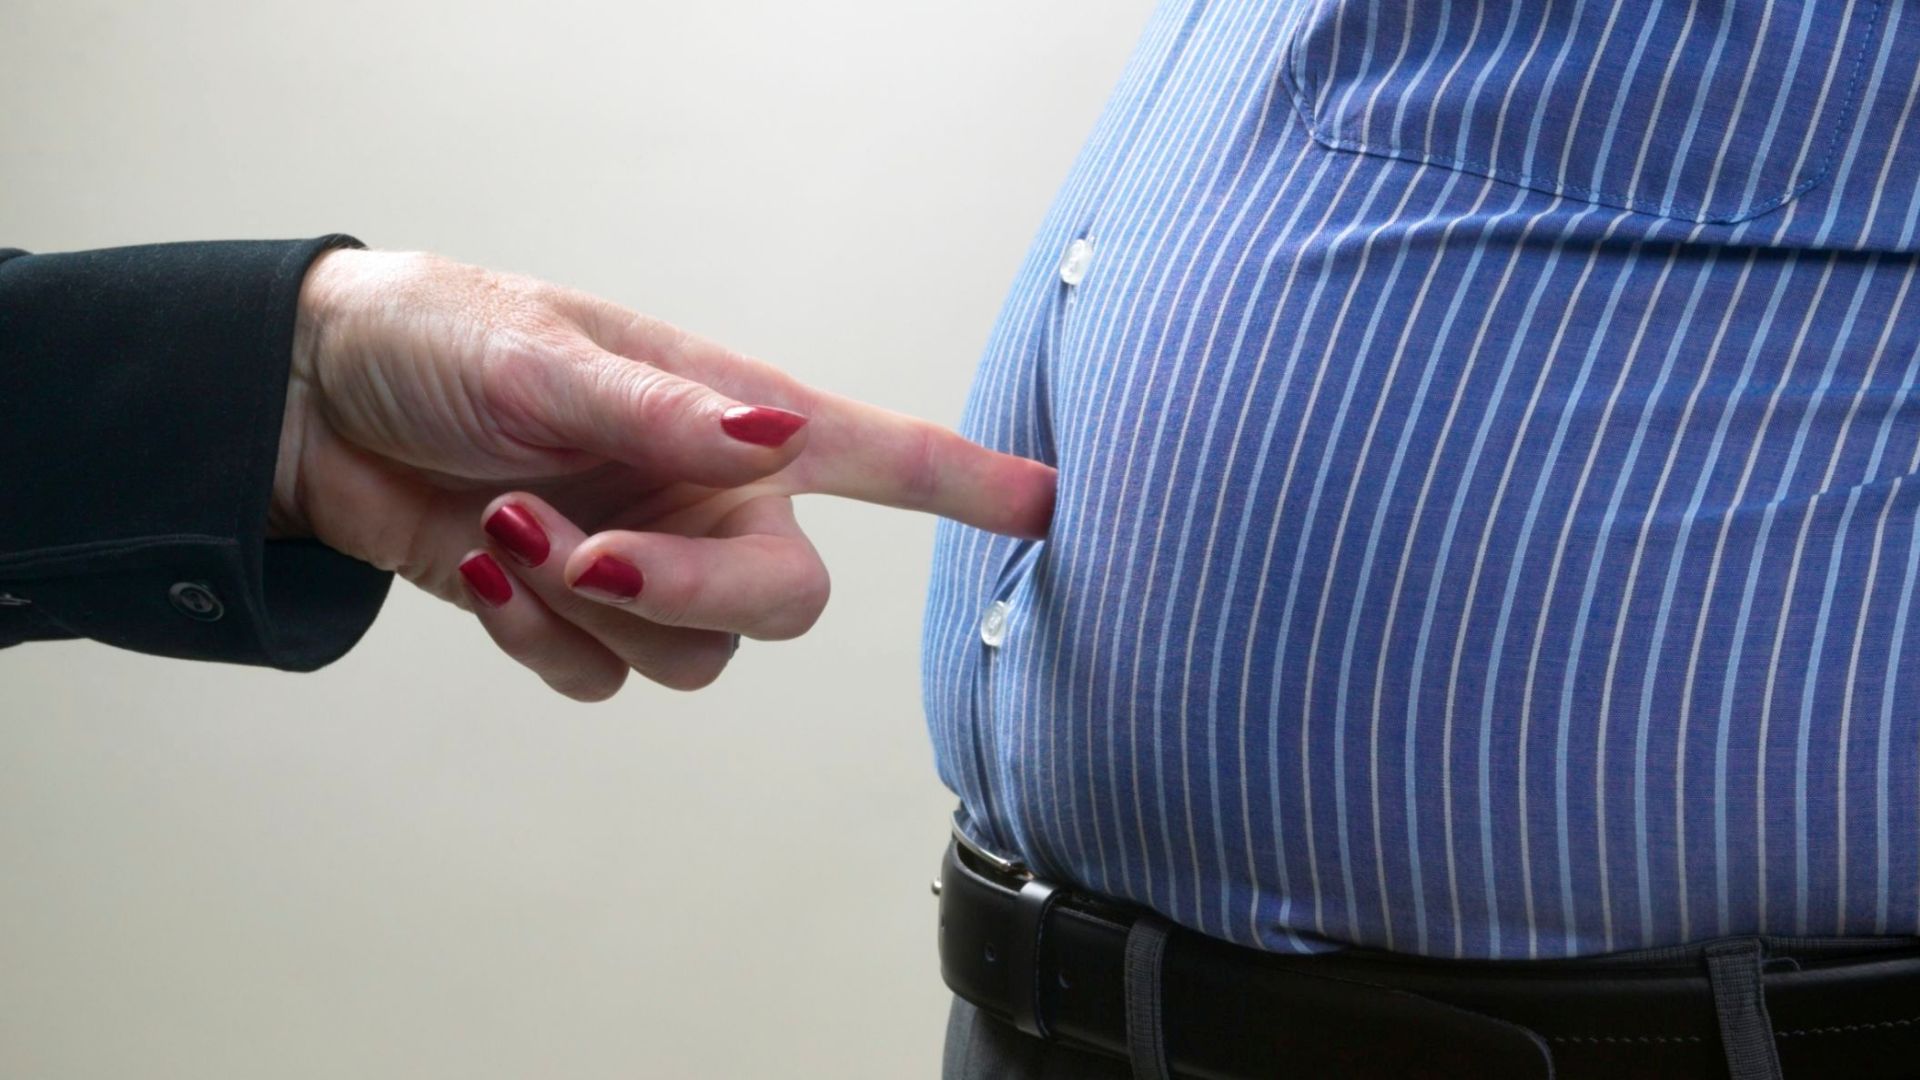 Excess Weight Raises Risk Of Prostate Cancer